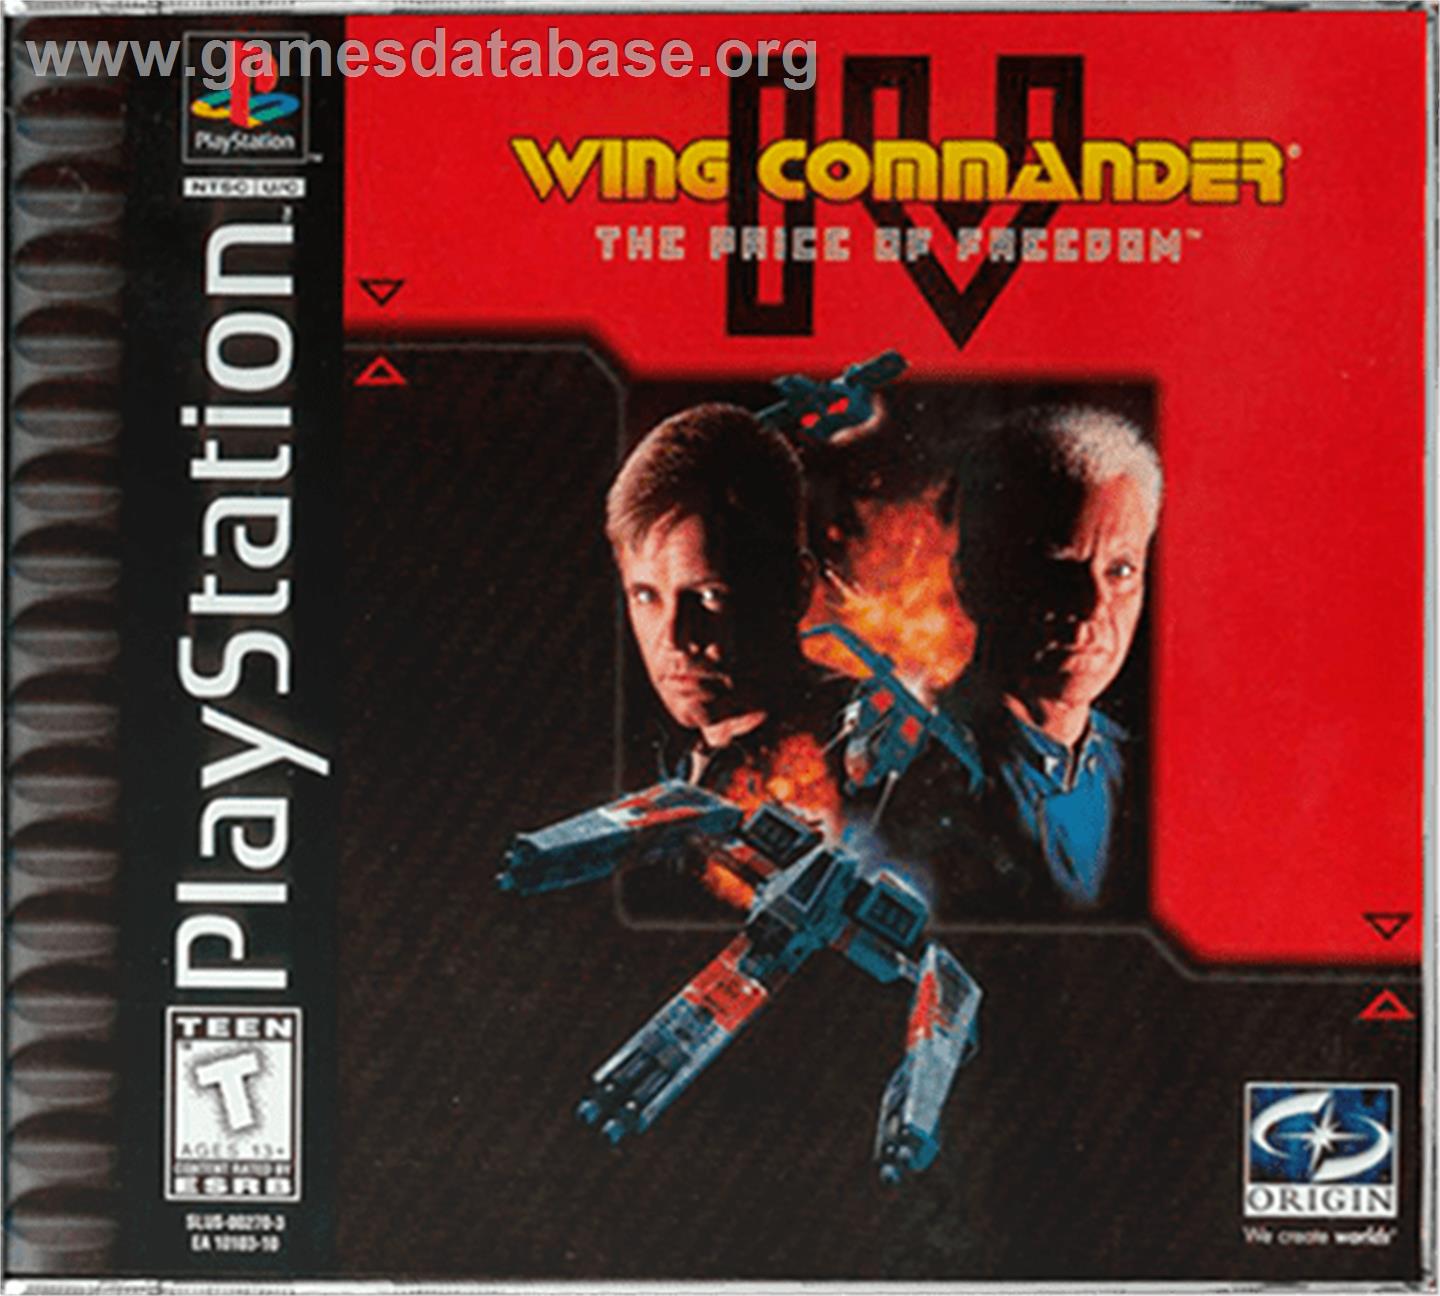 Wing Commander IV: The Price of Freedom - Sony Playstation - Artwork - Box